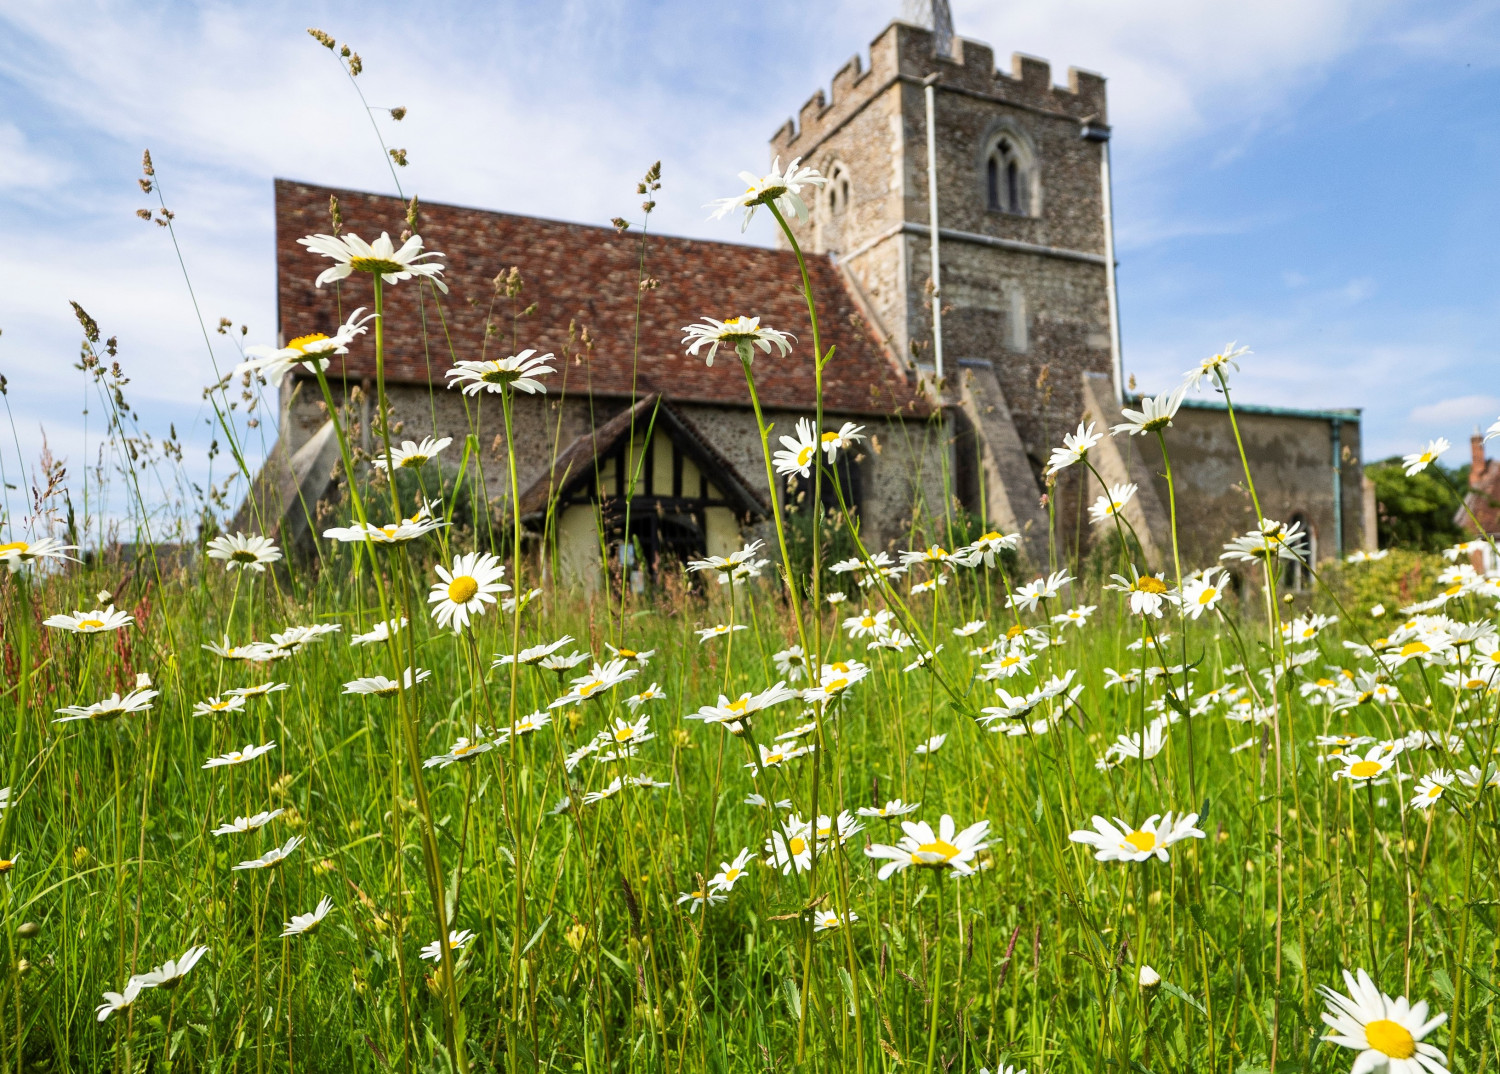 Church in distance with daisies in foreground